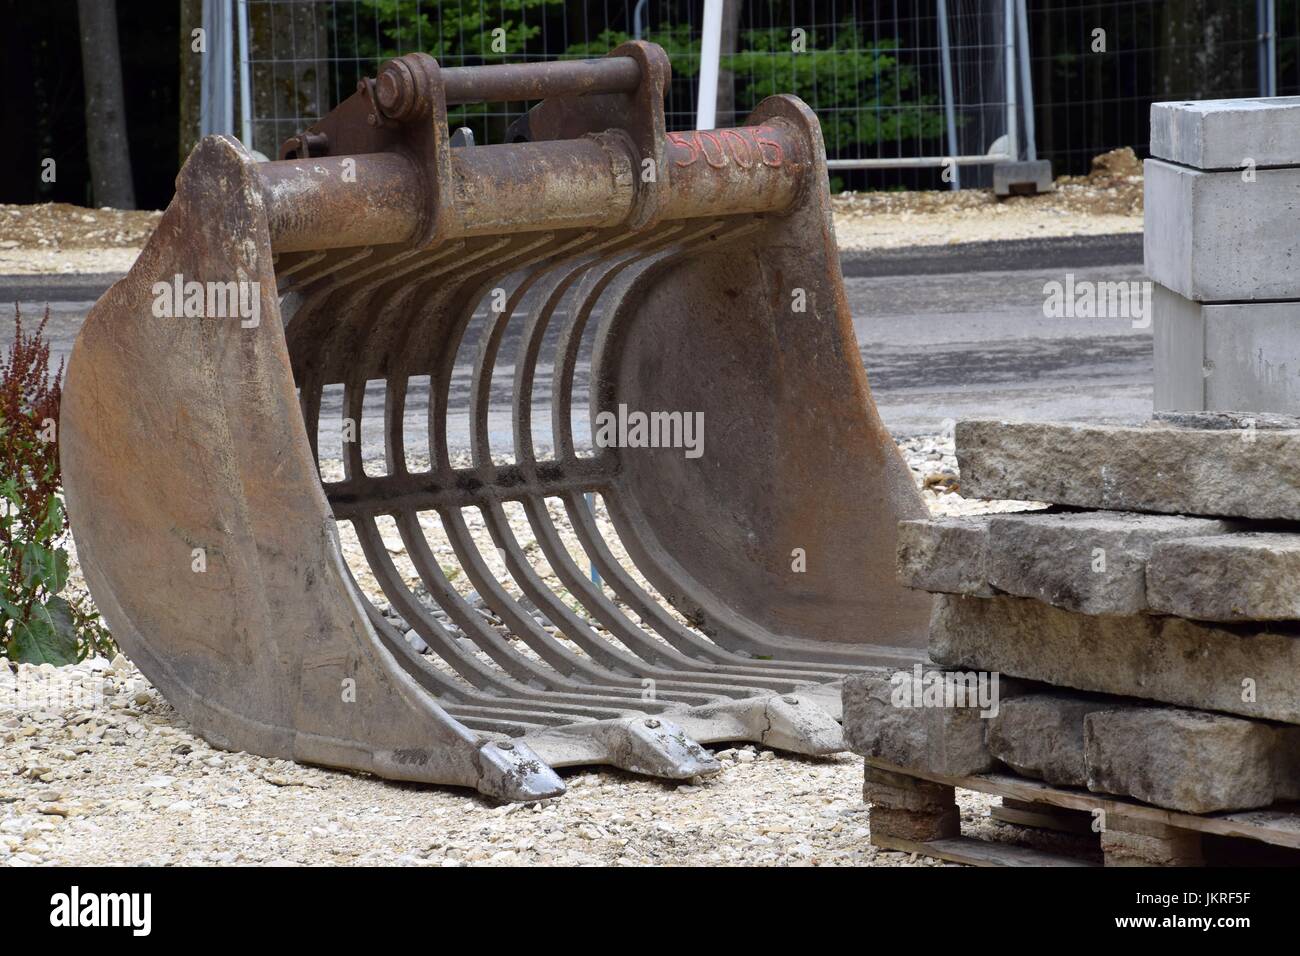 construction Site, construction equipment with building materials Stock Photo